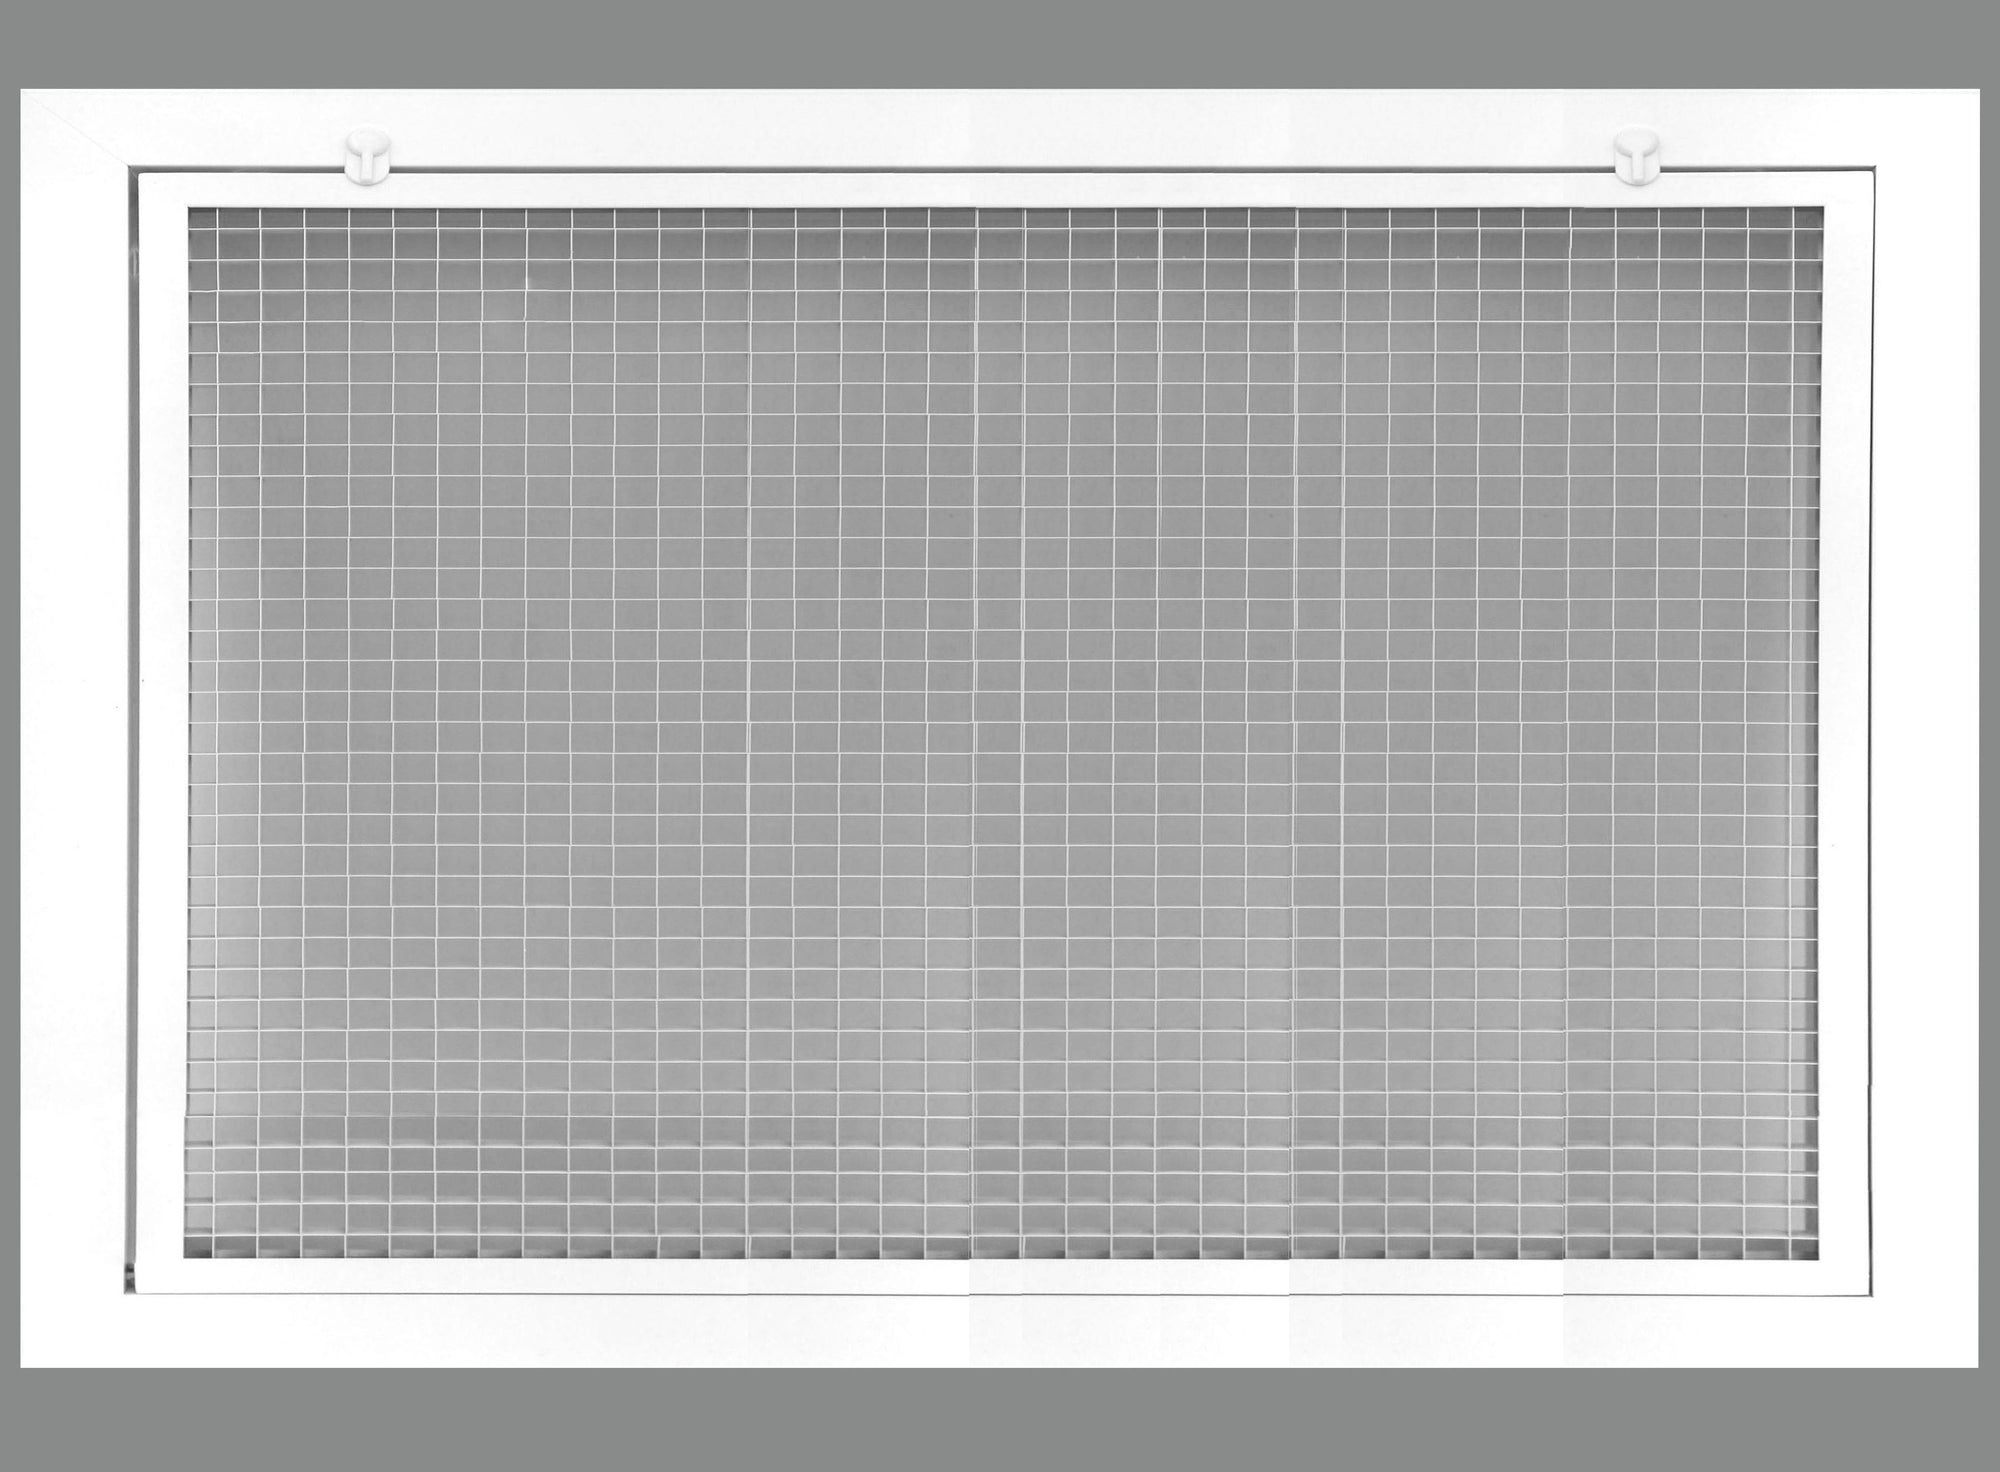 22" x 16" Cube Core Eggcrate Return Air Filter Grille for 1" Filter